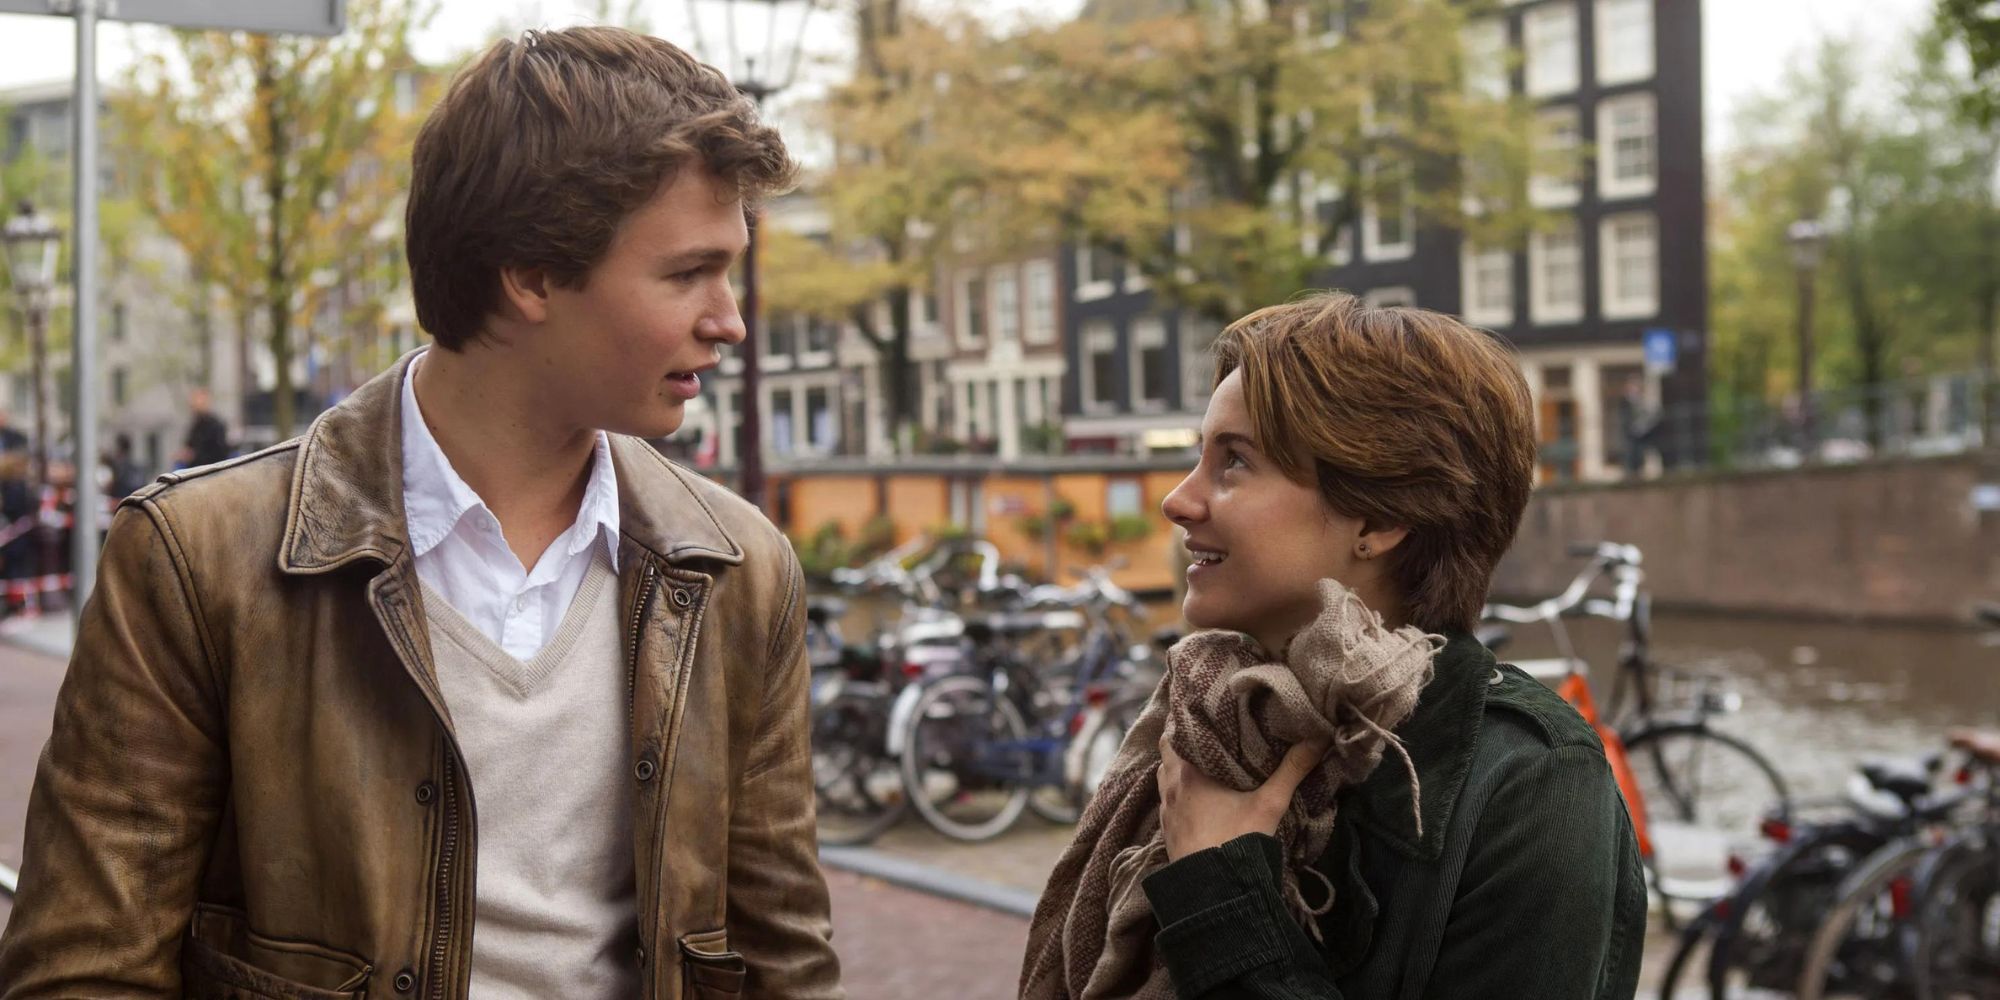 Augustus and Hazel from The Fault In Our Stars talk to each other